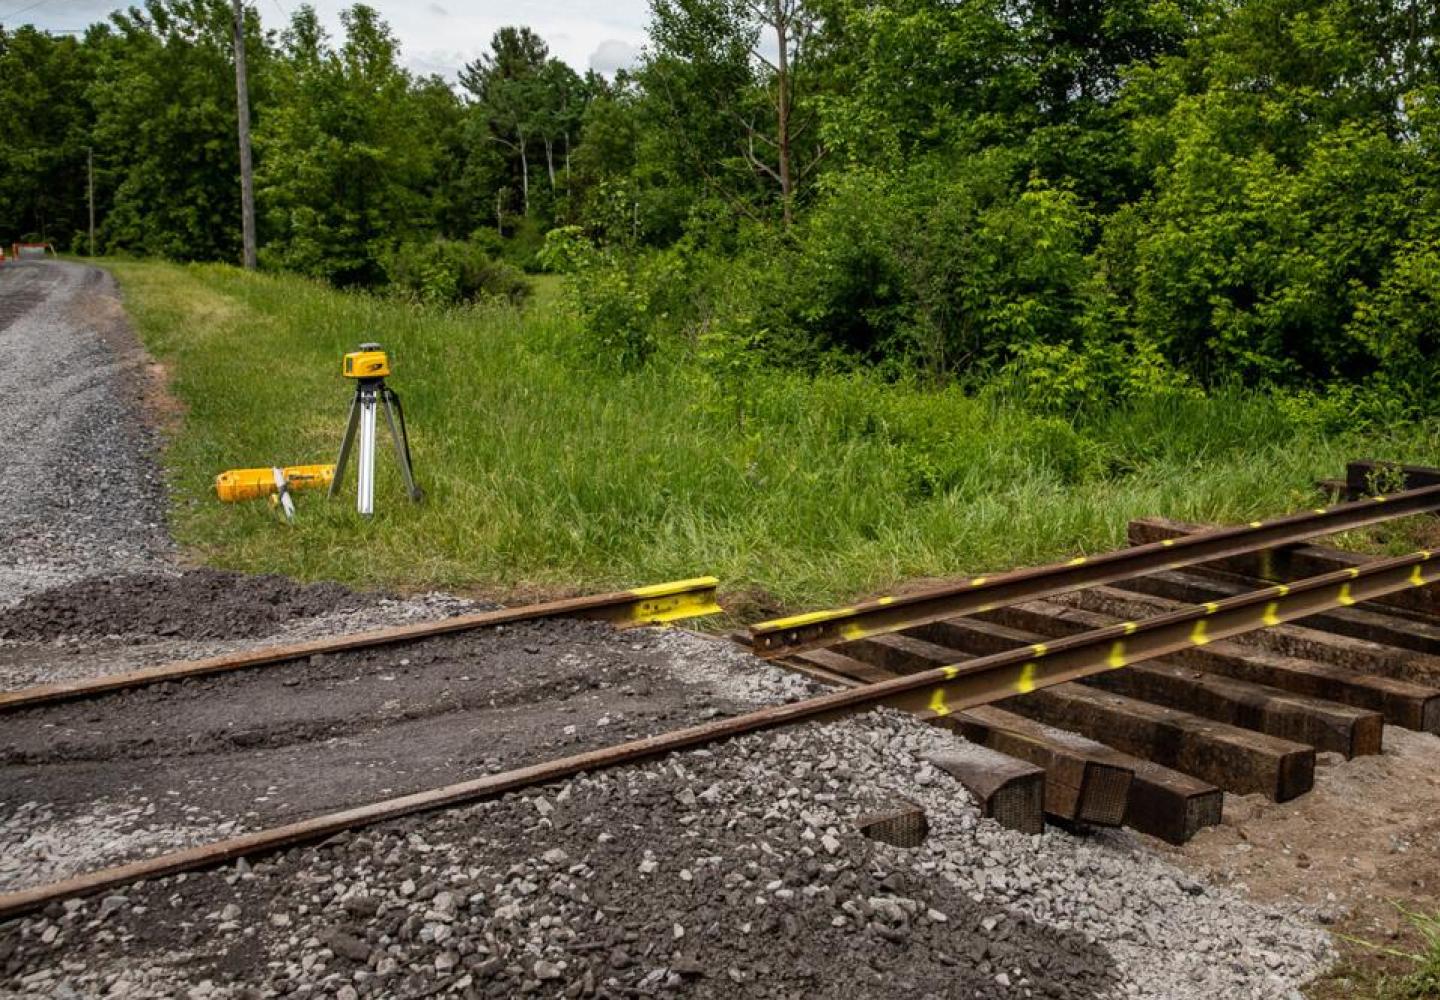 A new rail trail is proposed for Lewis County, NY.